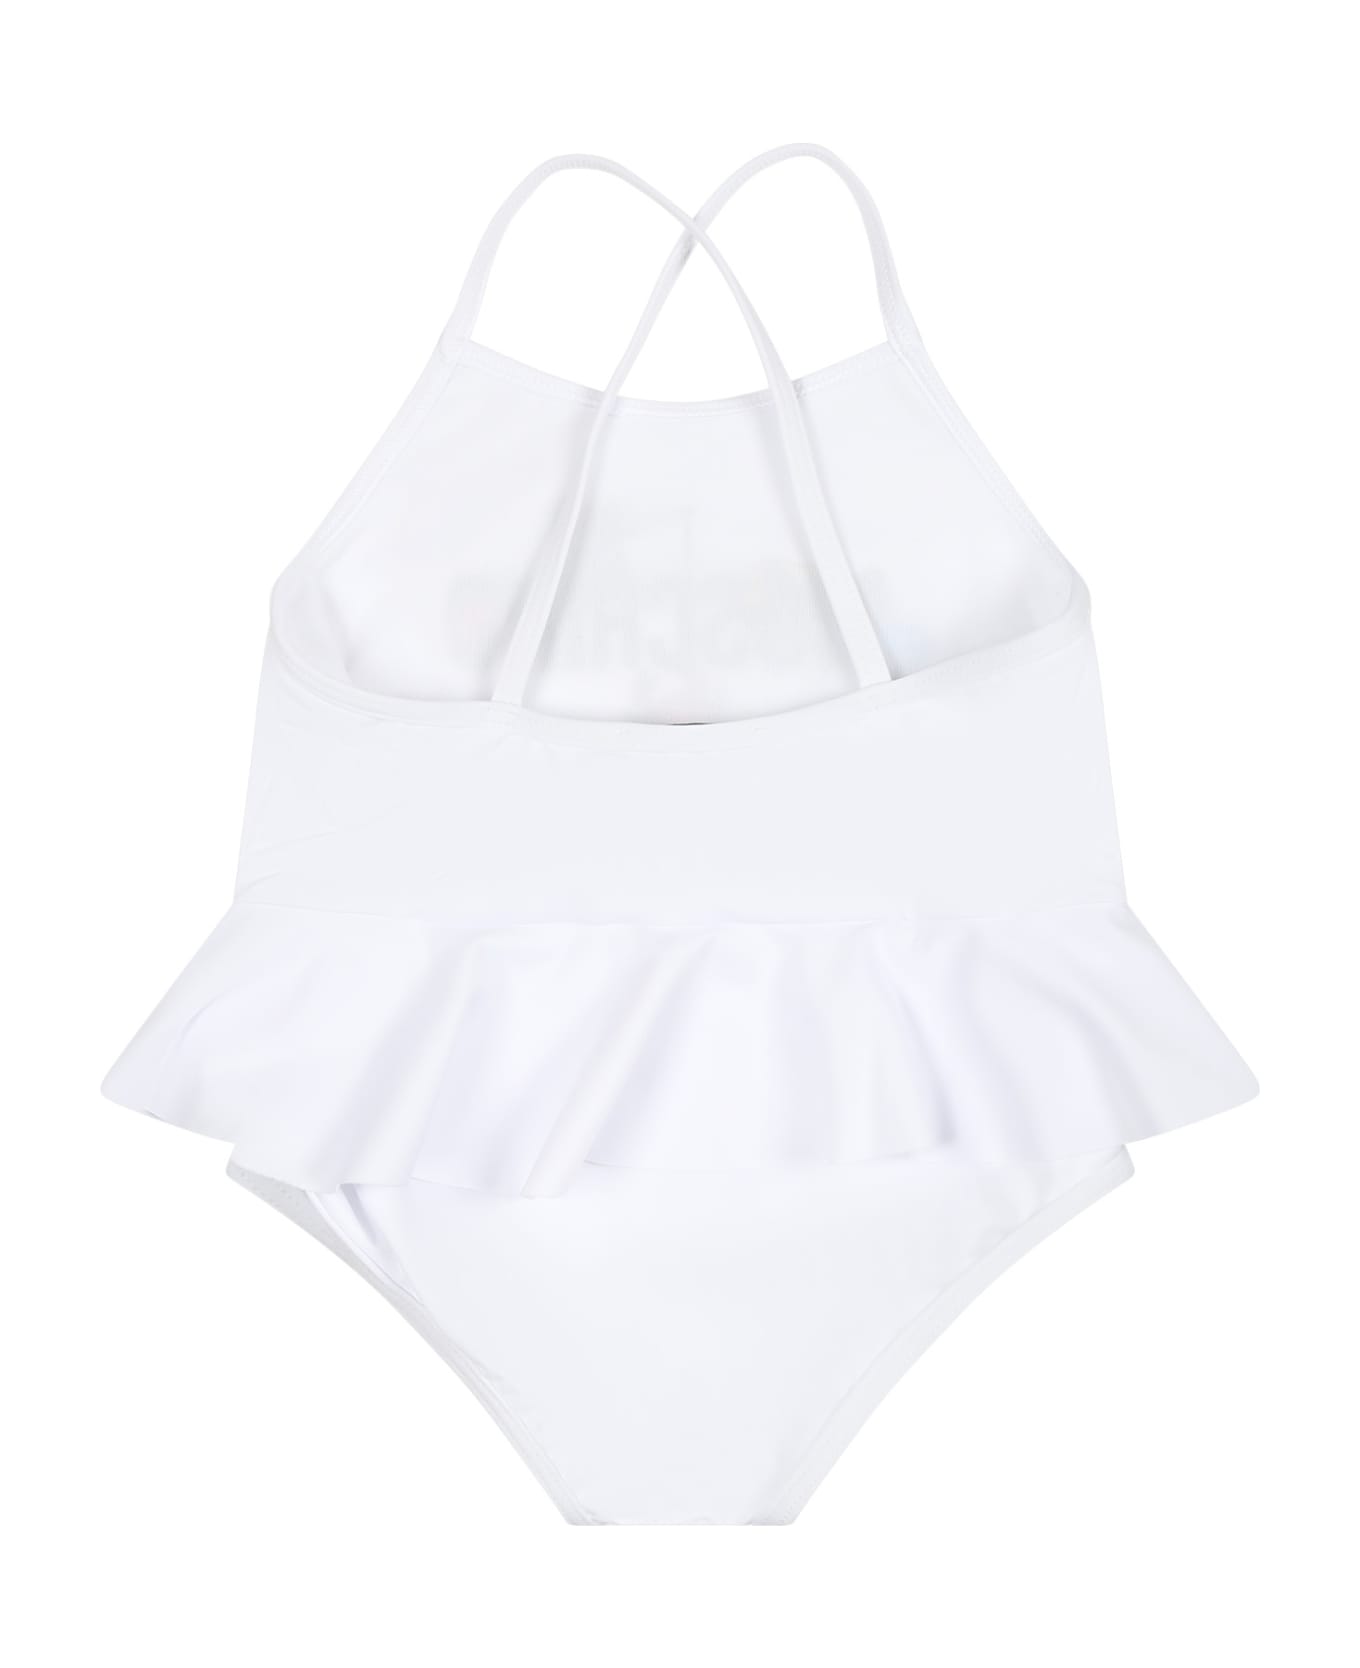 Moschino White One Piece Swimsuit For Baby Girl With Logo - White 水着